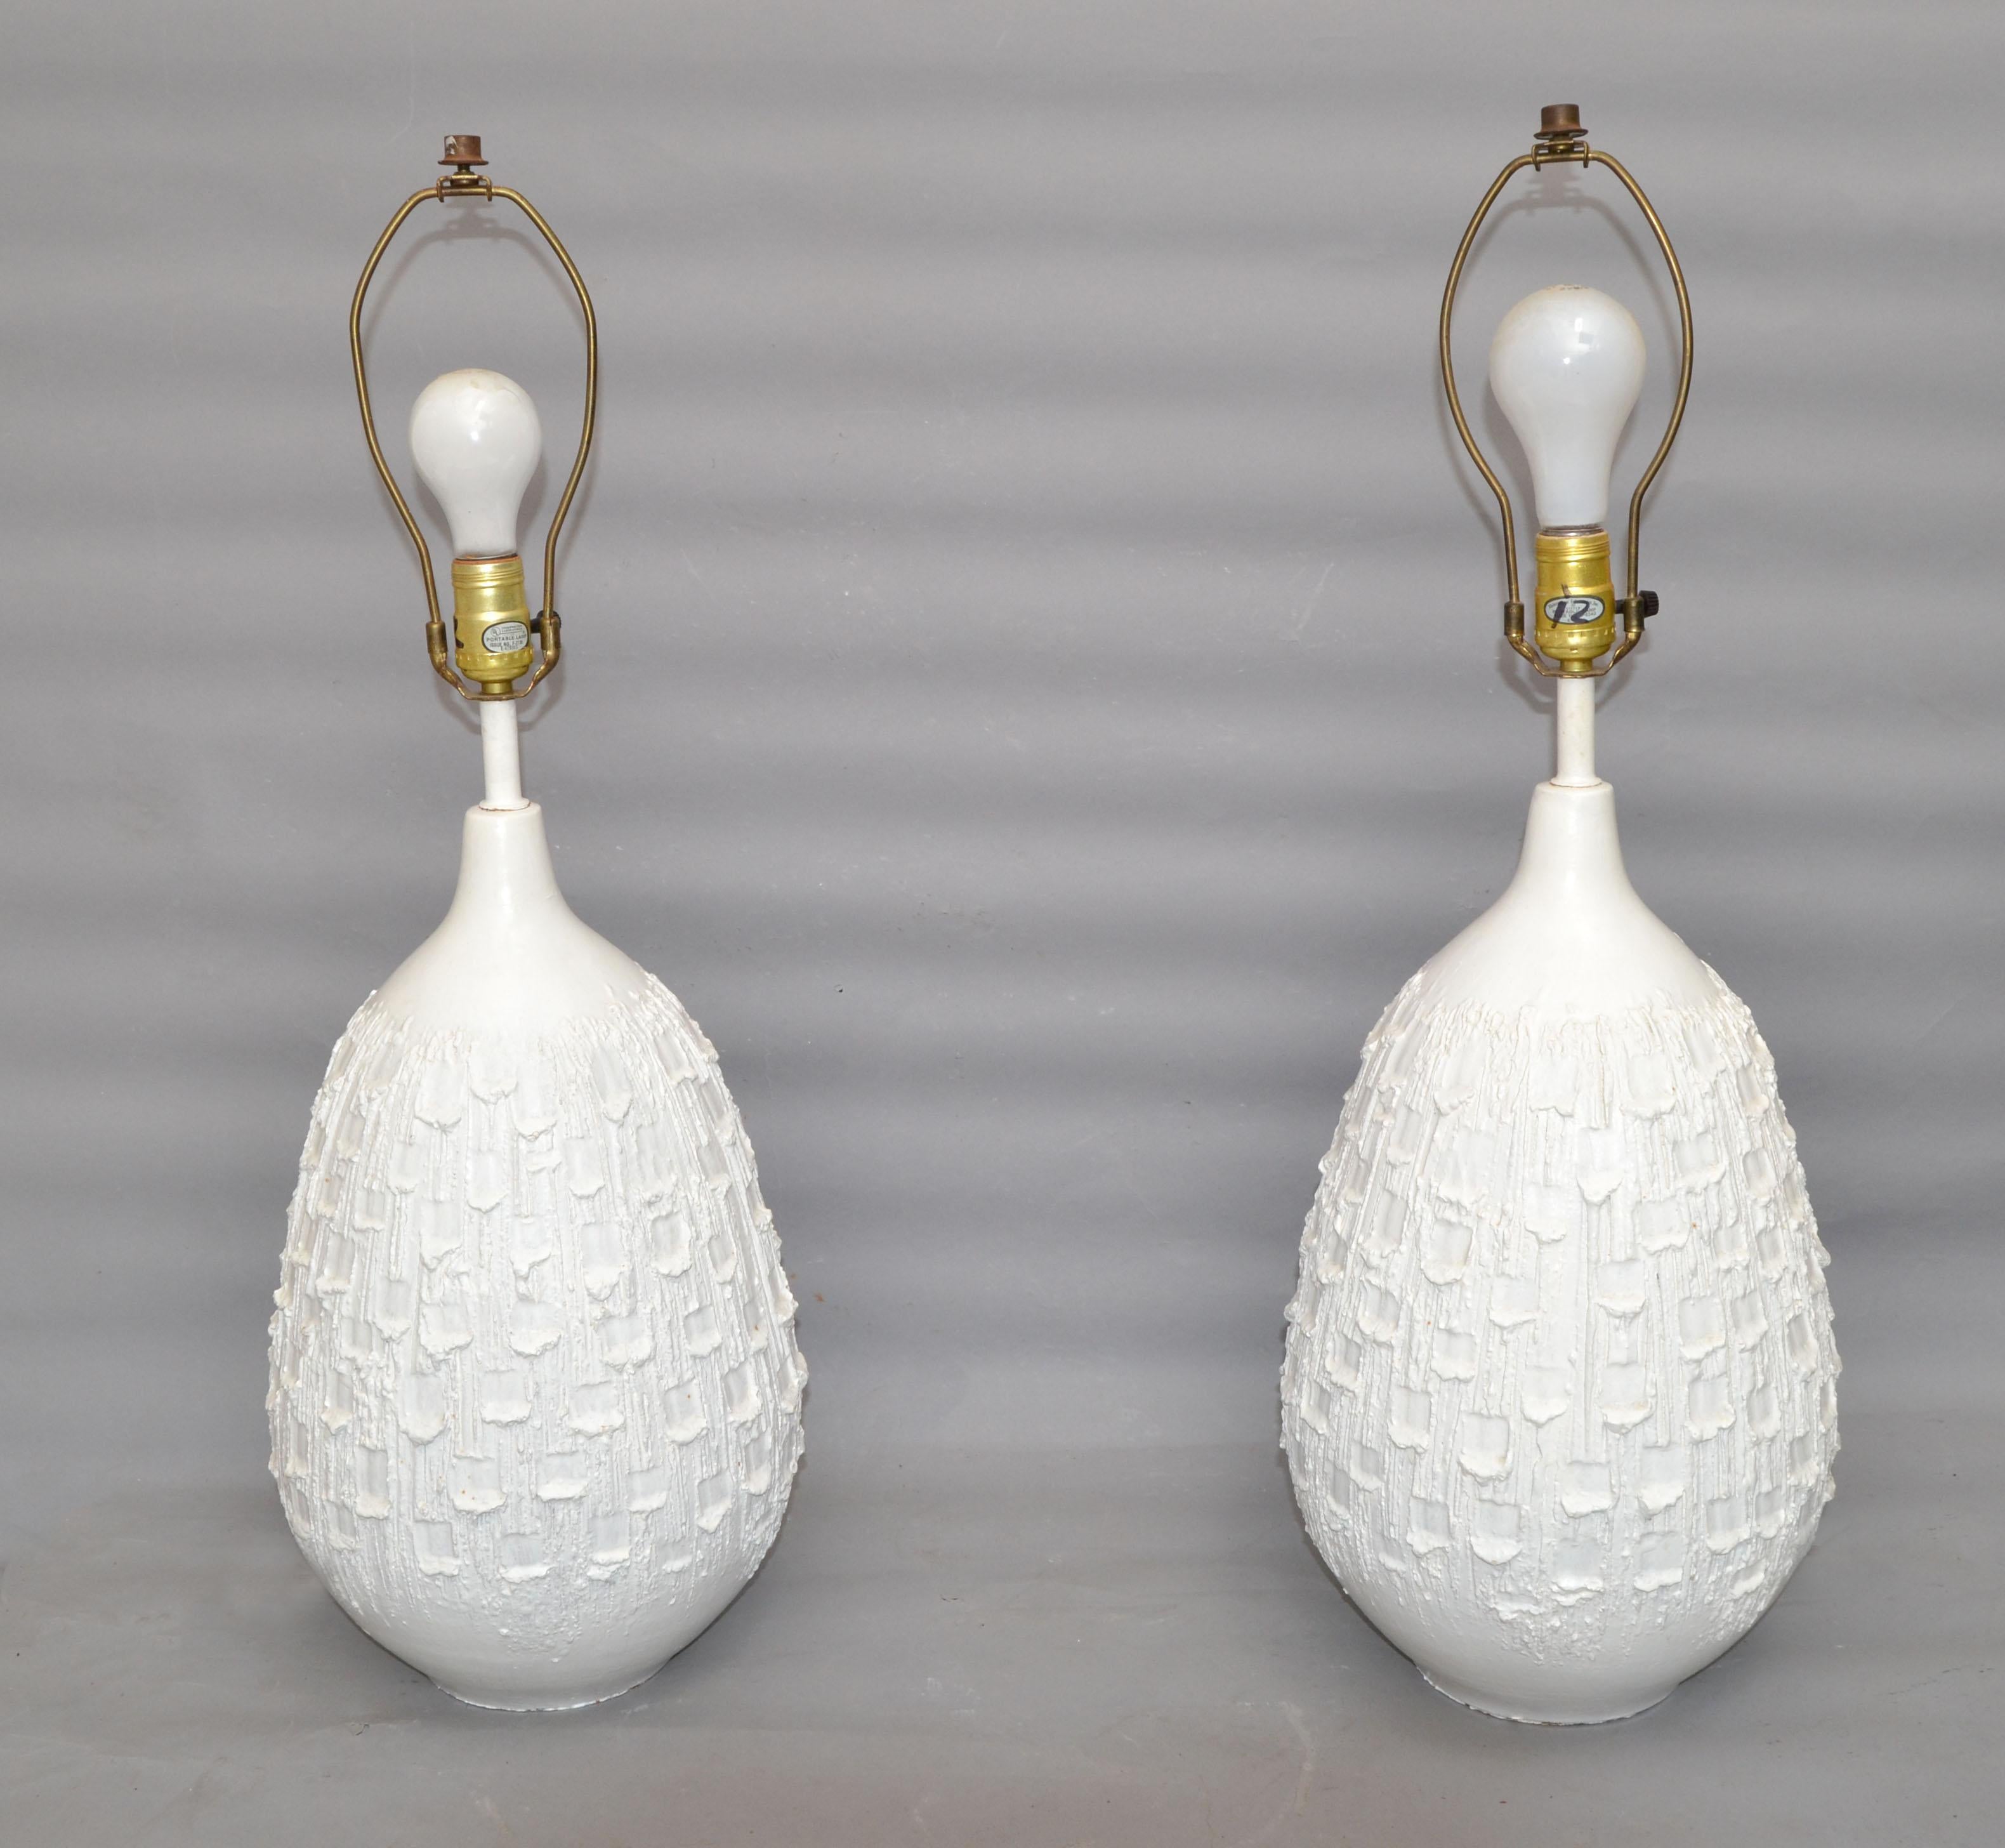 Pair of Mid-Century Modern white ceramic table lamps in a rough texture. 
Wired for the US and each lamp takes a regular or LED bulb.
Shade not included.
Height to top of socket: 22 inches.